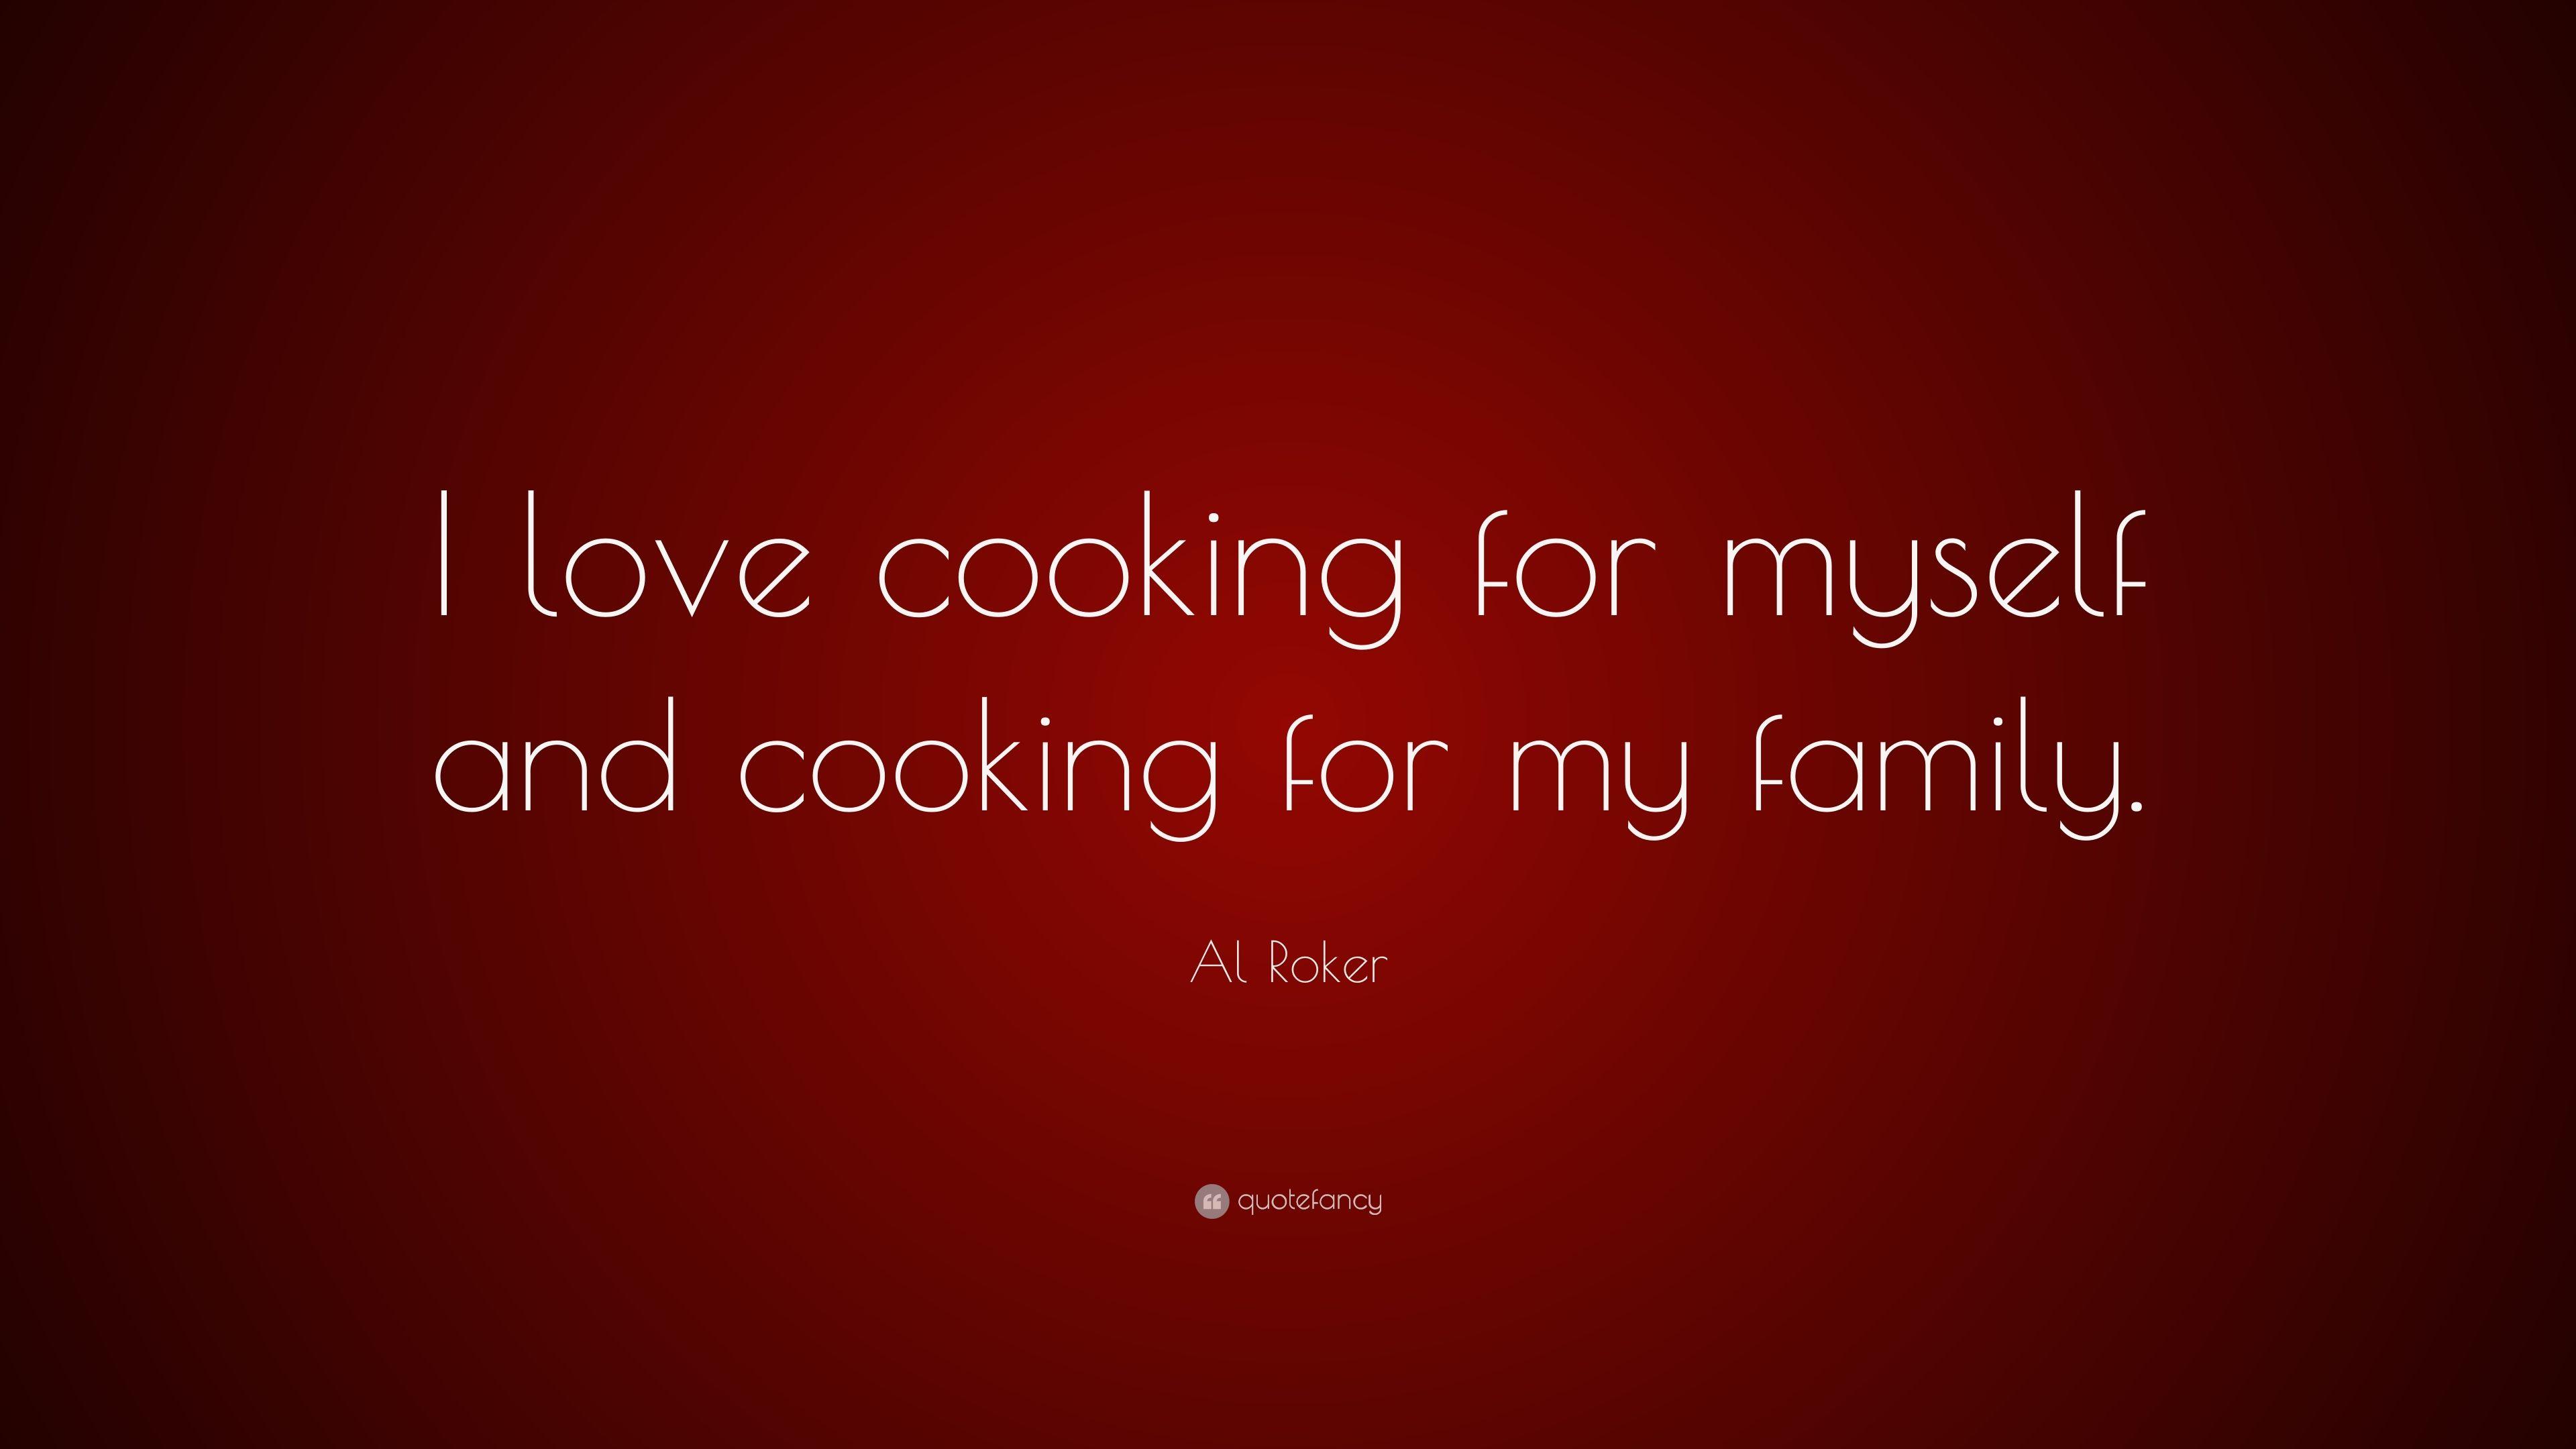 Al Roker Quote: “I love cooking for myself and cooking for my family